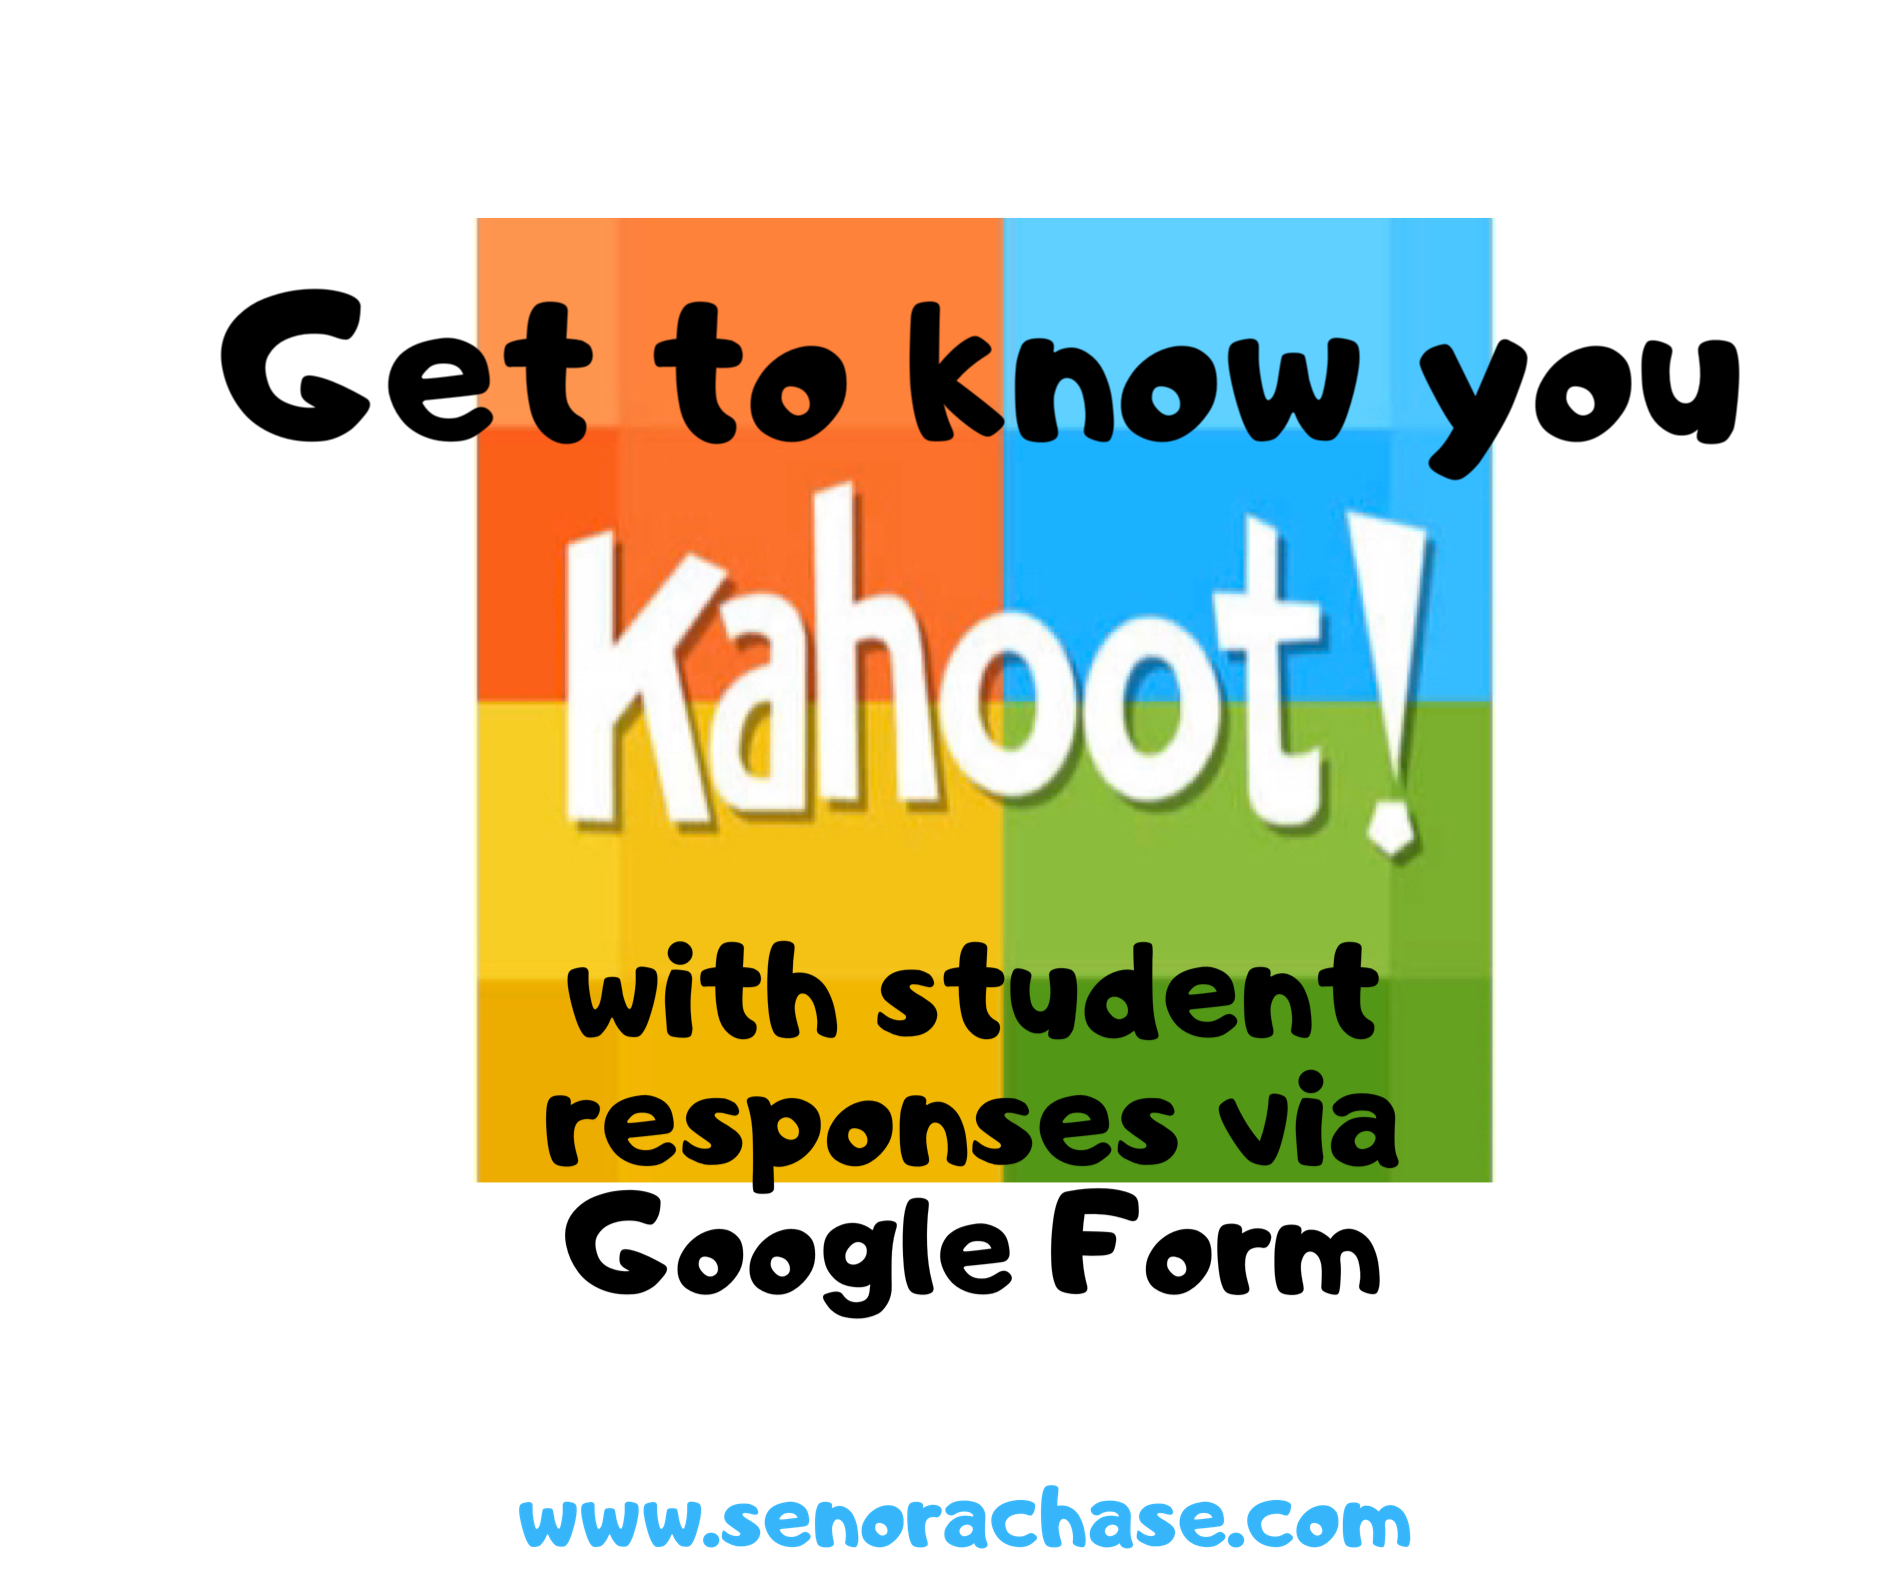 Get To Know You Kahoot Loading Up My Little Darlings With Comprehensible Input